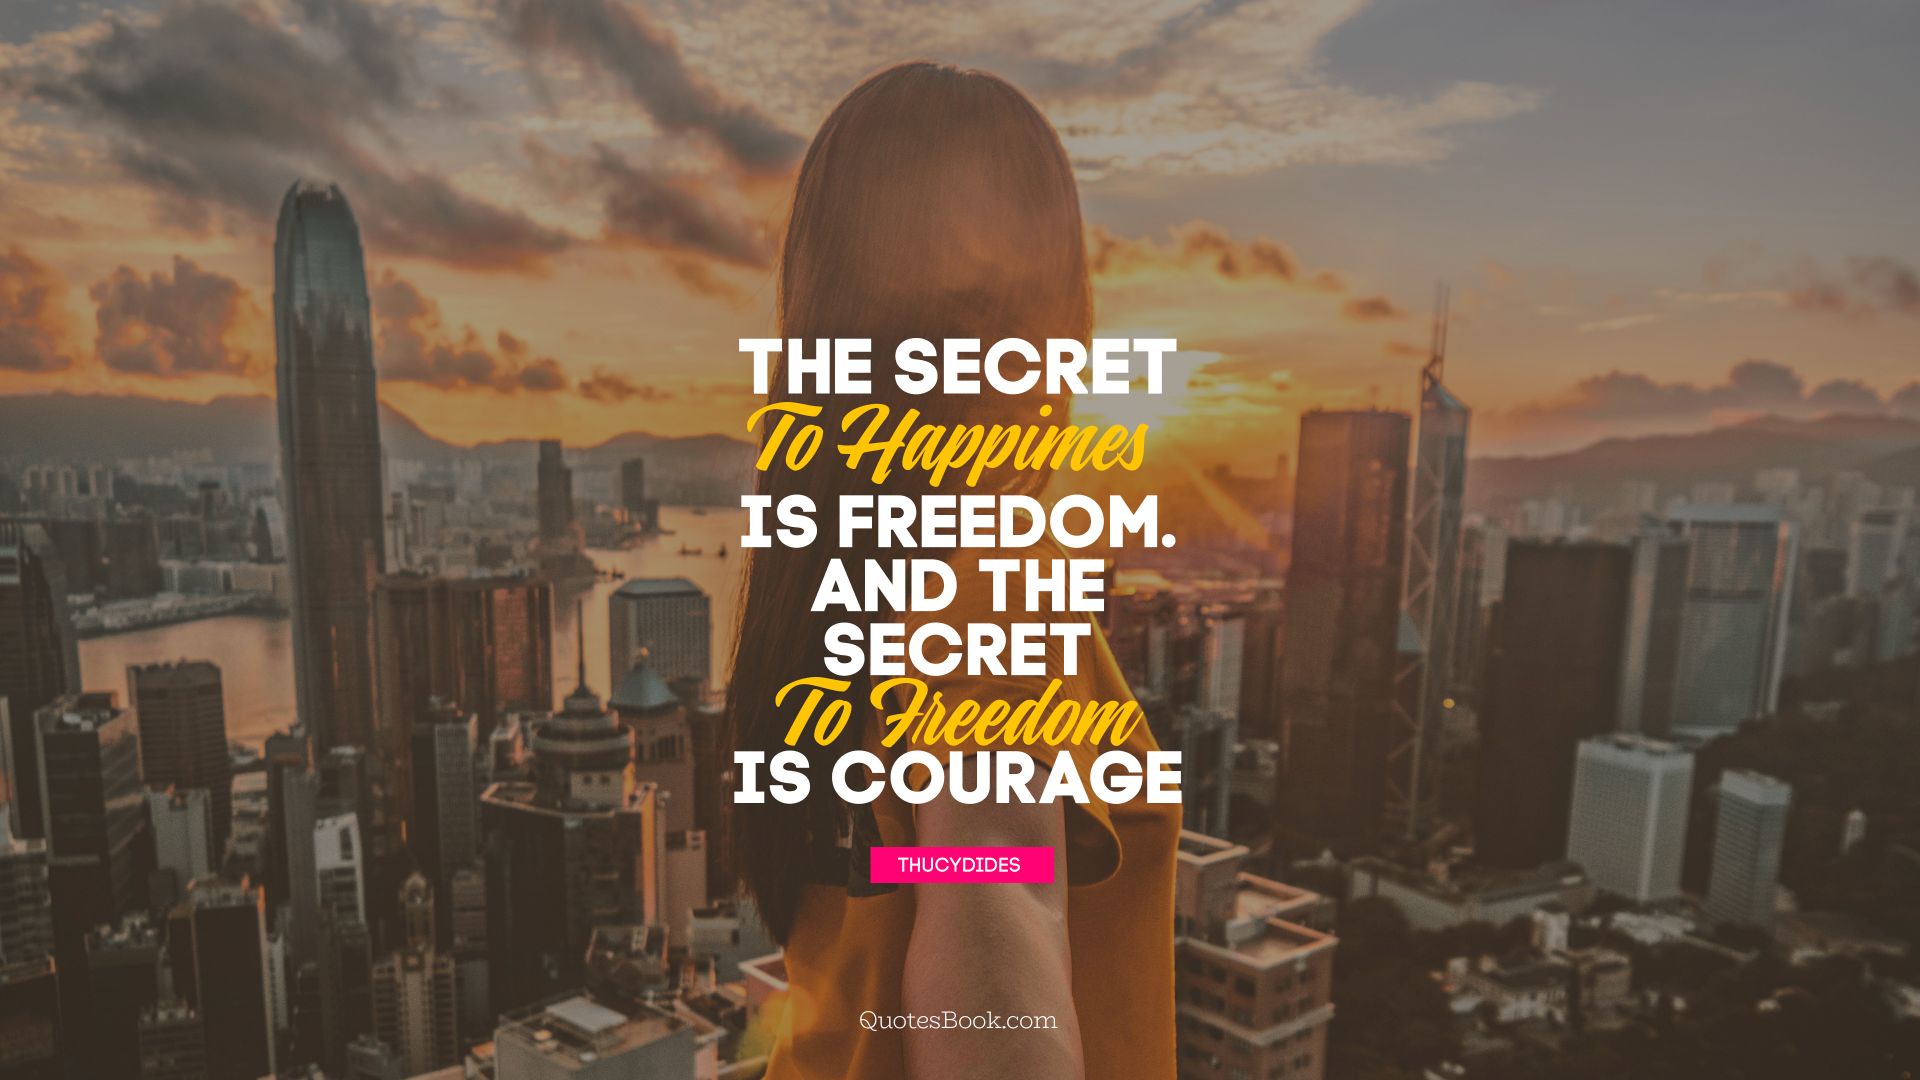 The secret to happiness is freedom... And the secret to freedom is courage. - Quote by Thucydides